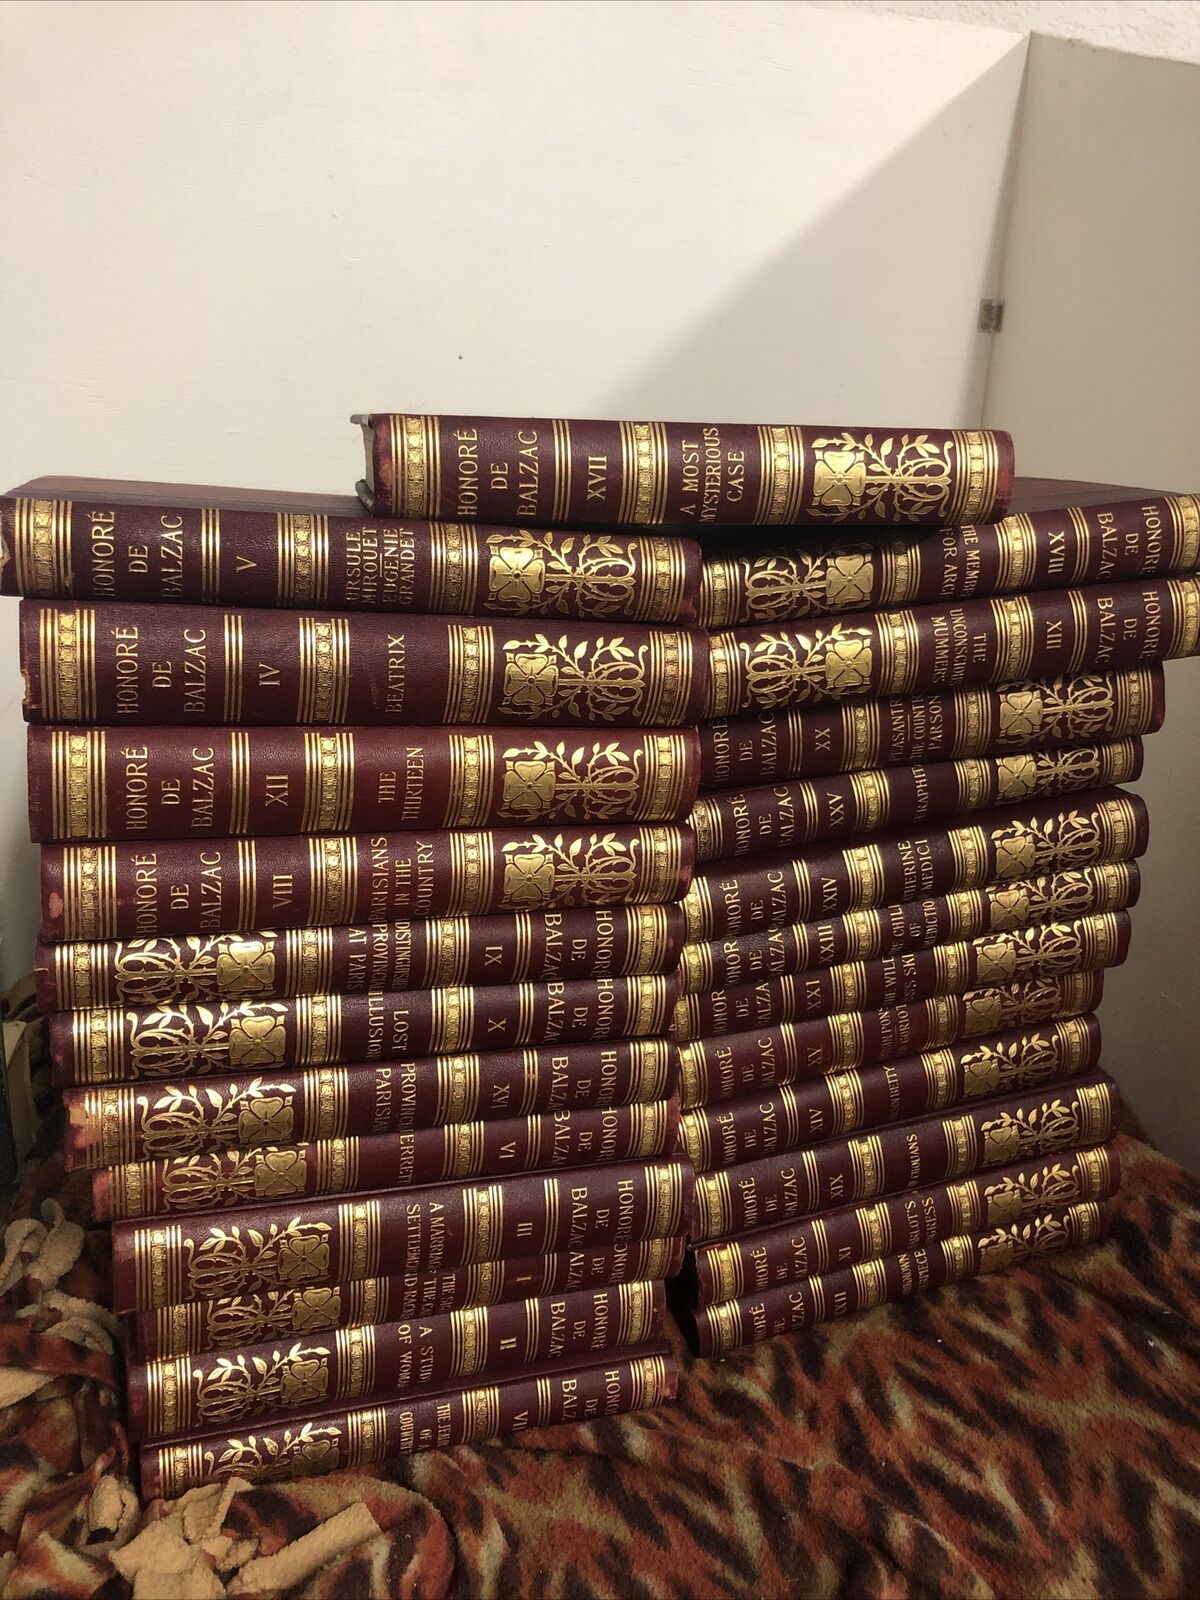 Honore De Balzac 25 Volumes Complete Red Leather Gilded 1900 Antique Very Good